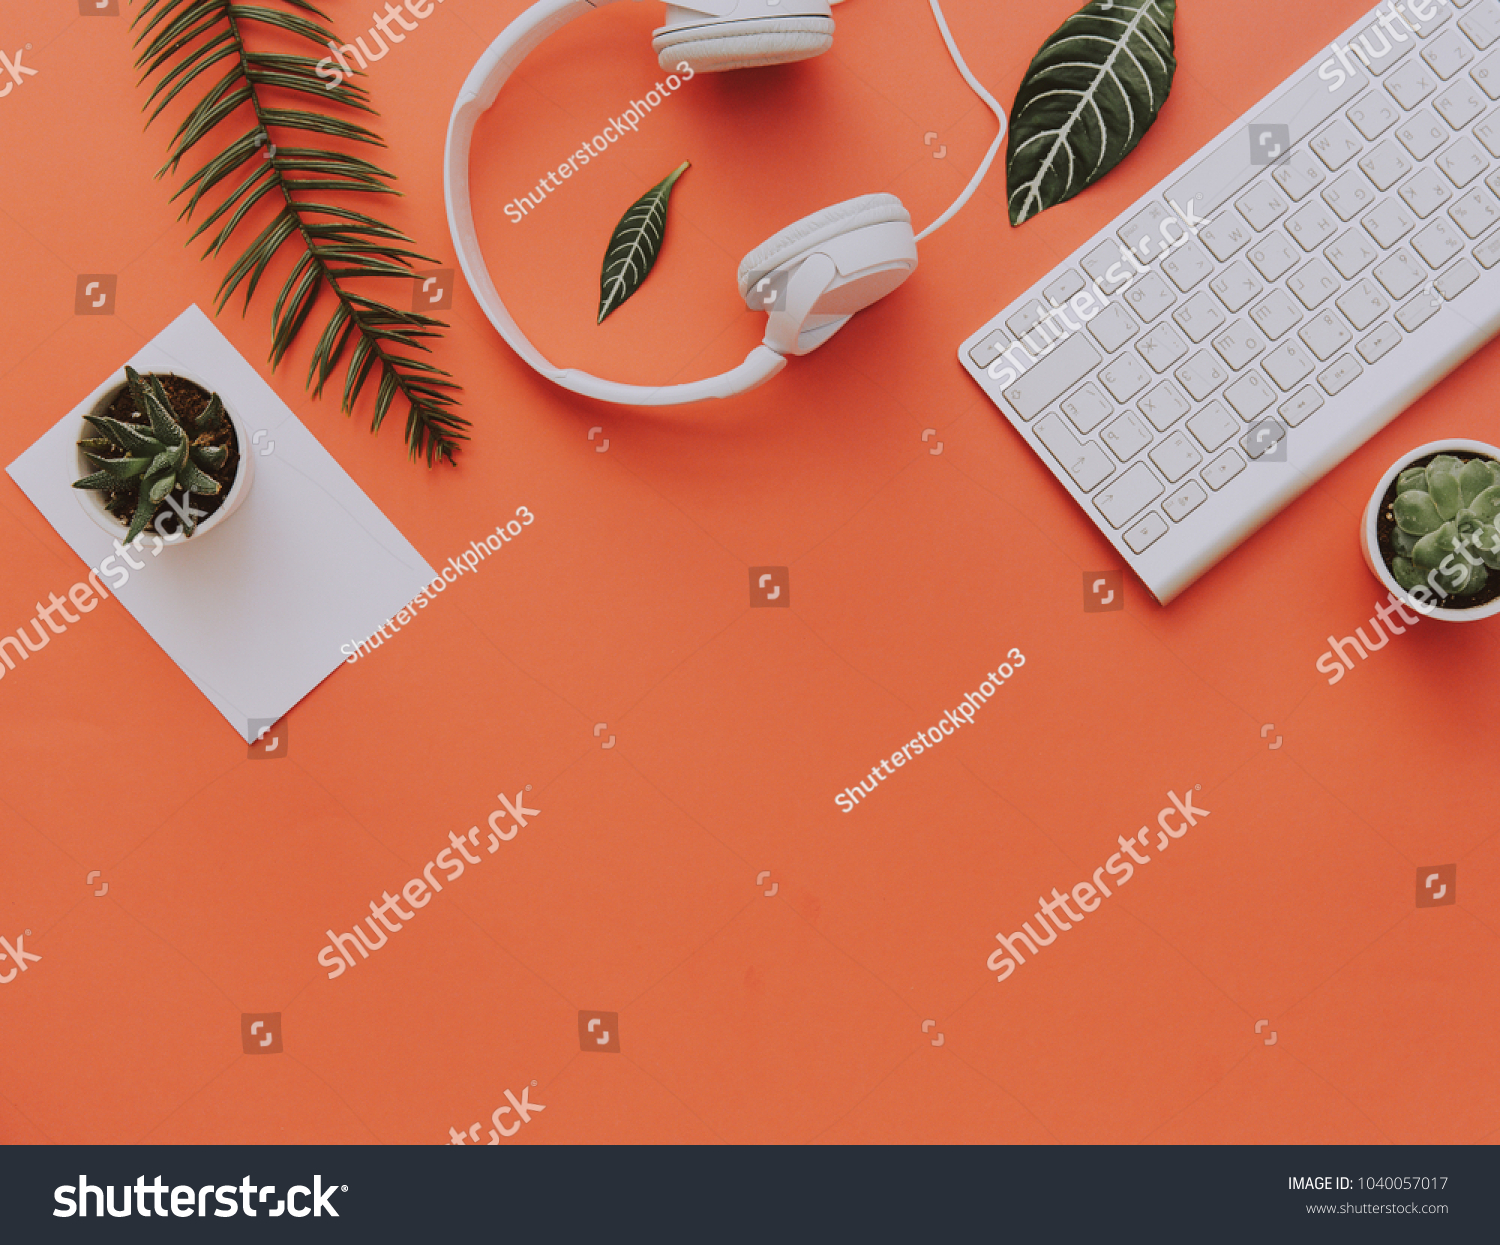 Creative flat lay of workspace desk, office stationery, keyboard, headphones and lifestyle objects on orange background with copy space #1040057017